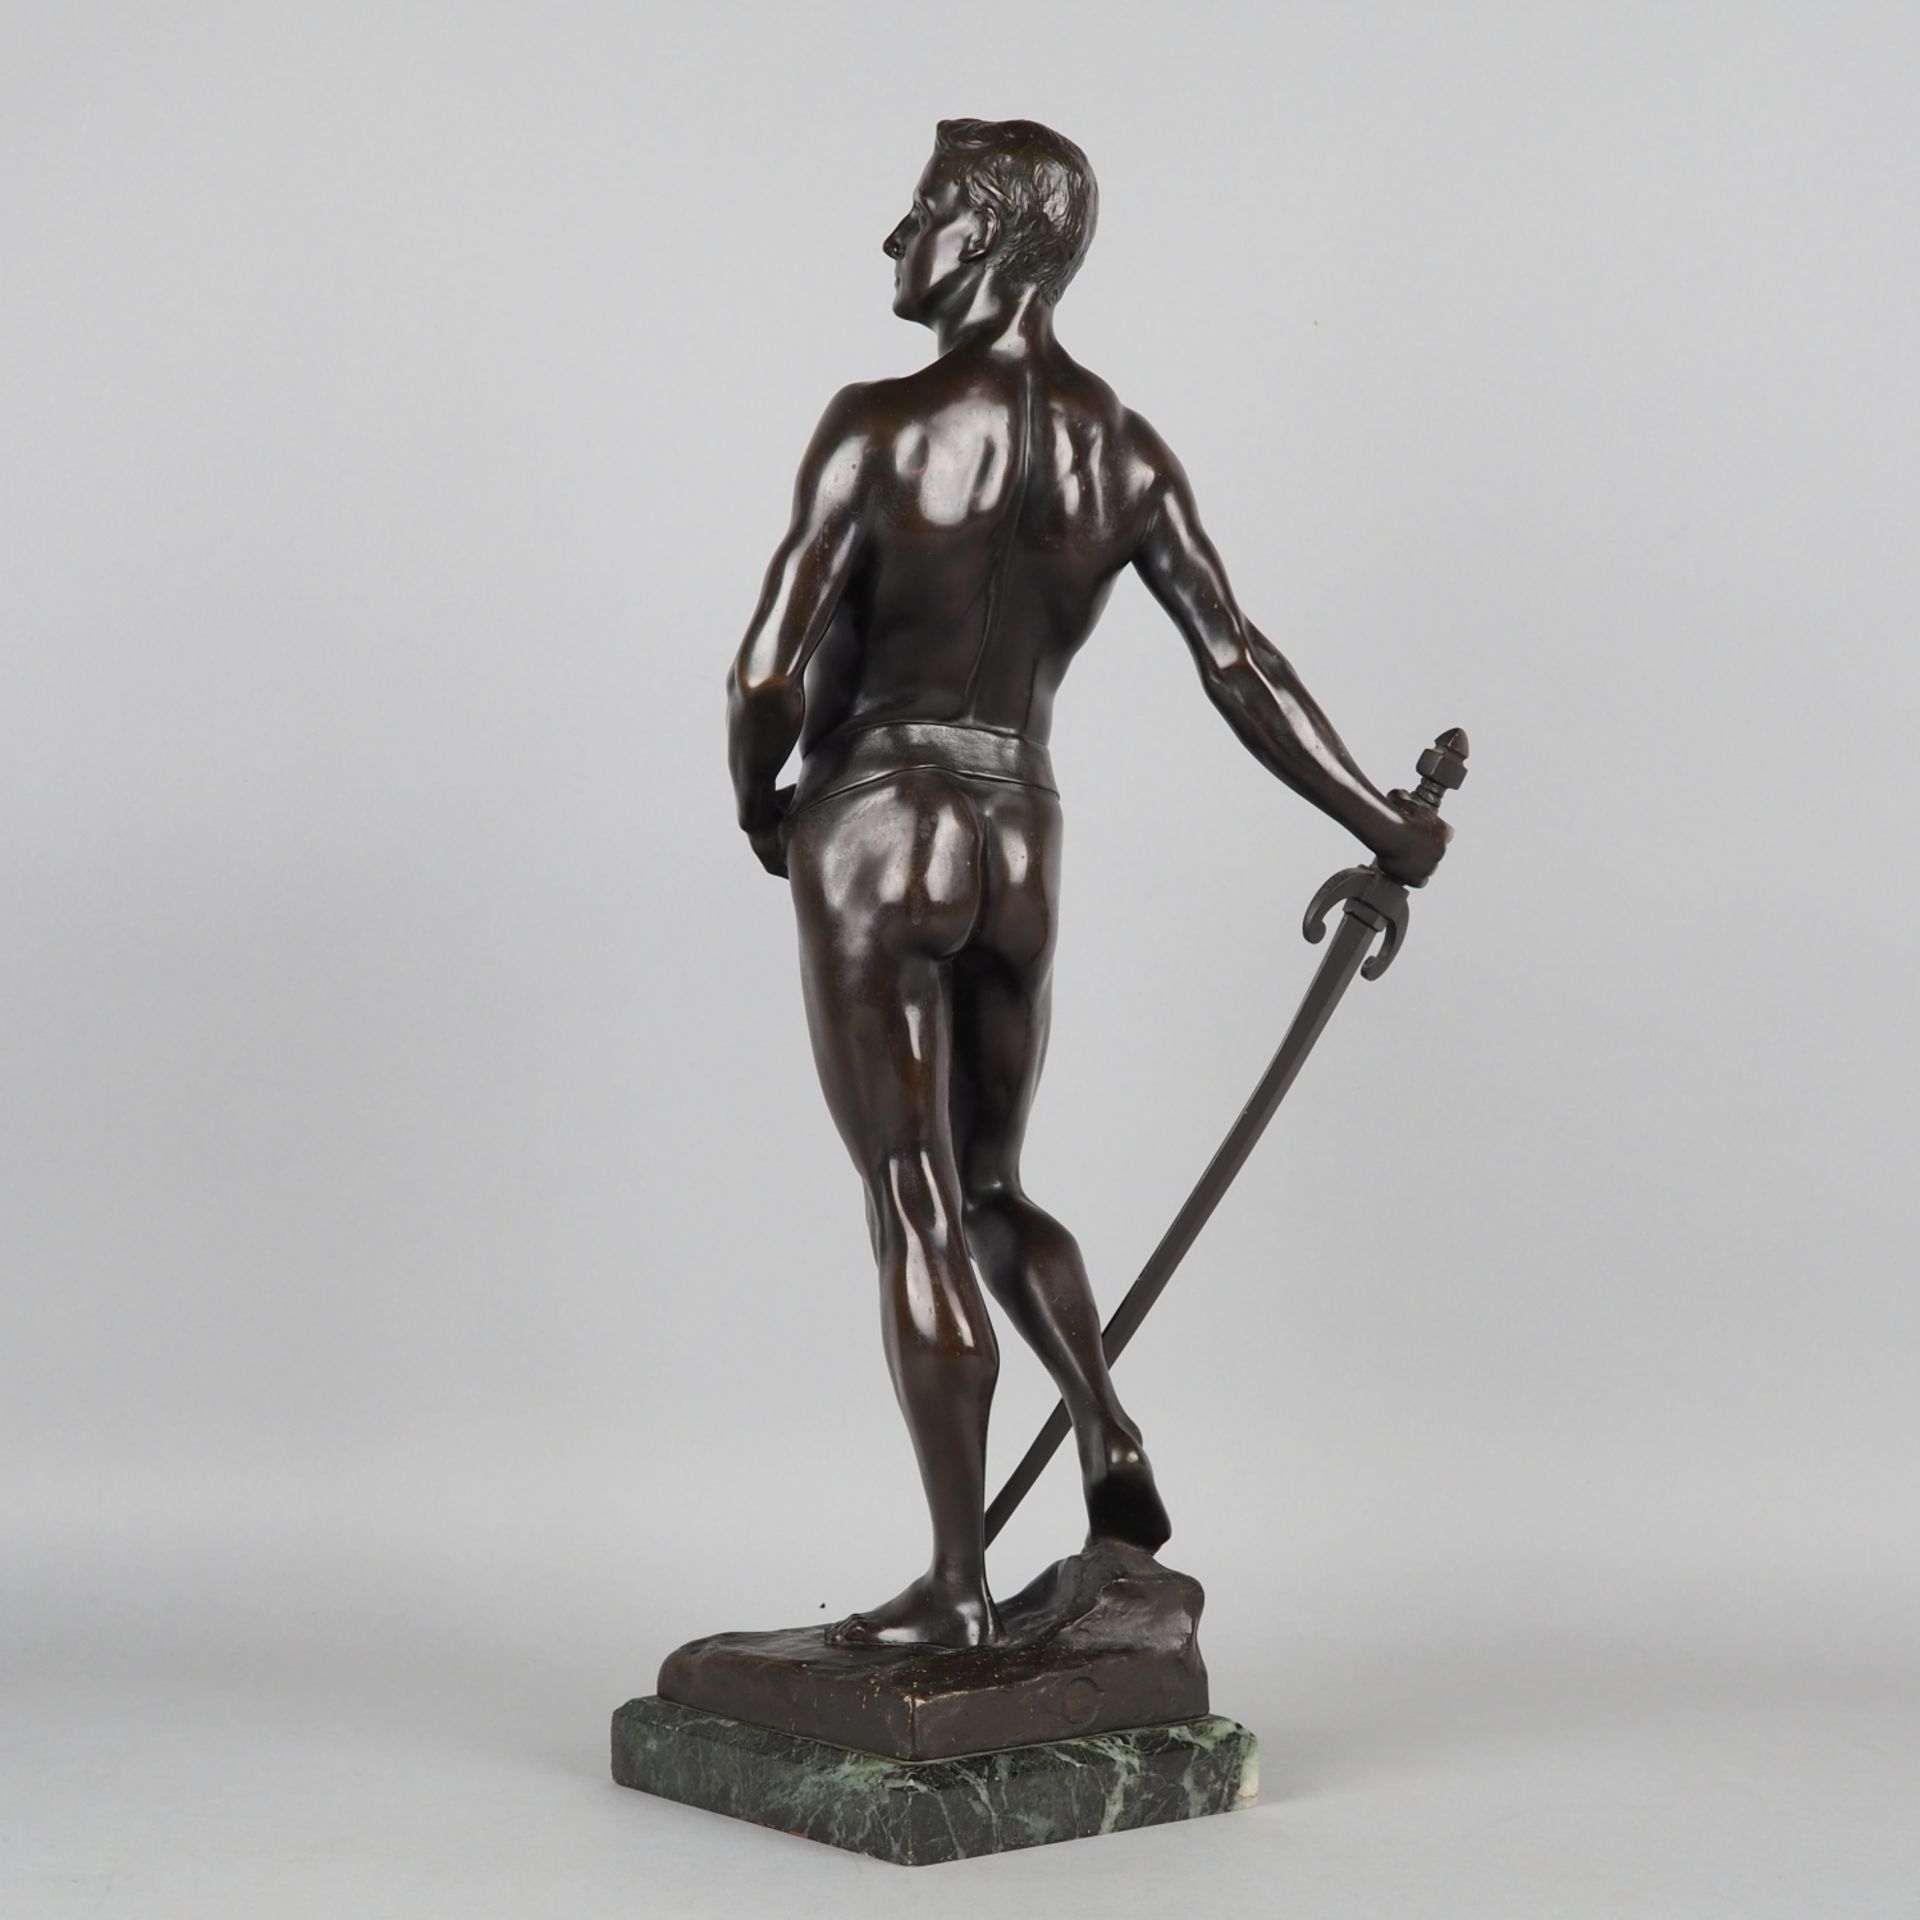 Finely crafted large bronze of a warrior by Paul Ludwig Kowalczewski around 1900 - Image 3 of 6